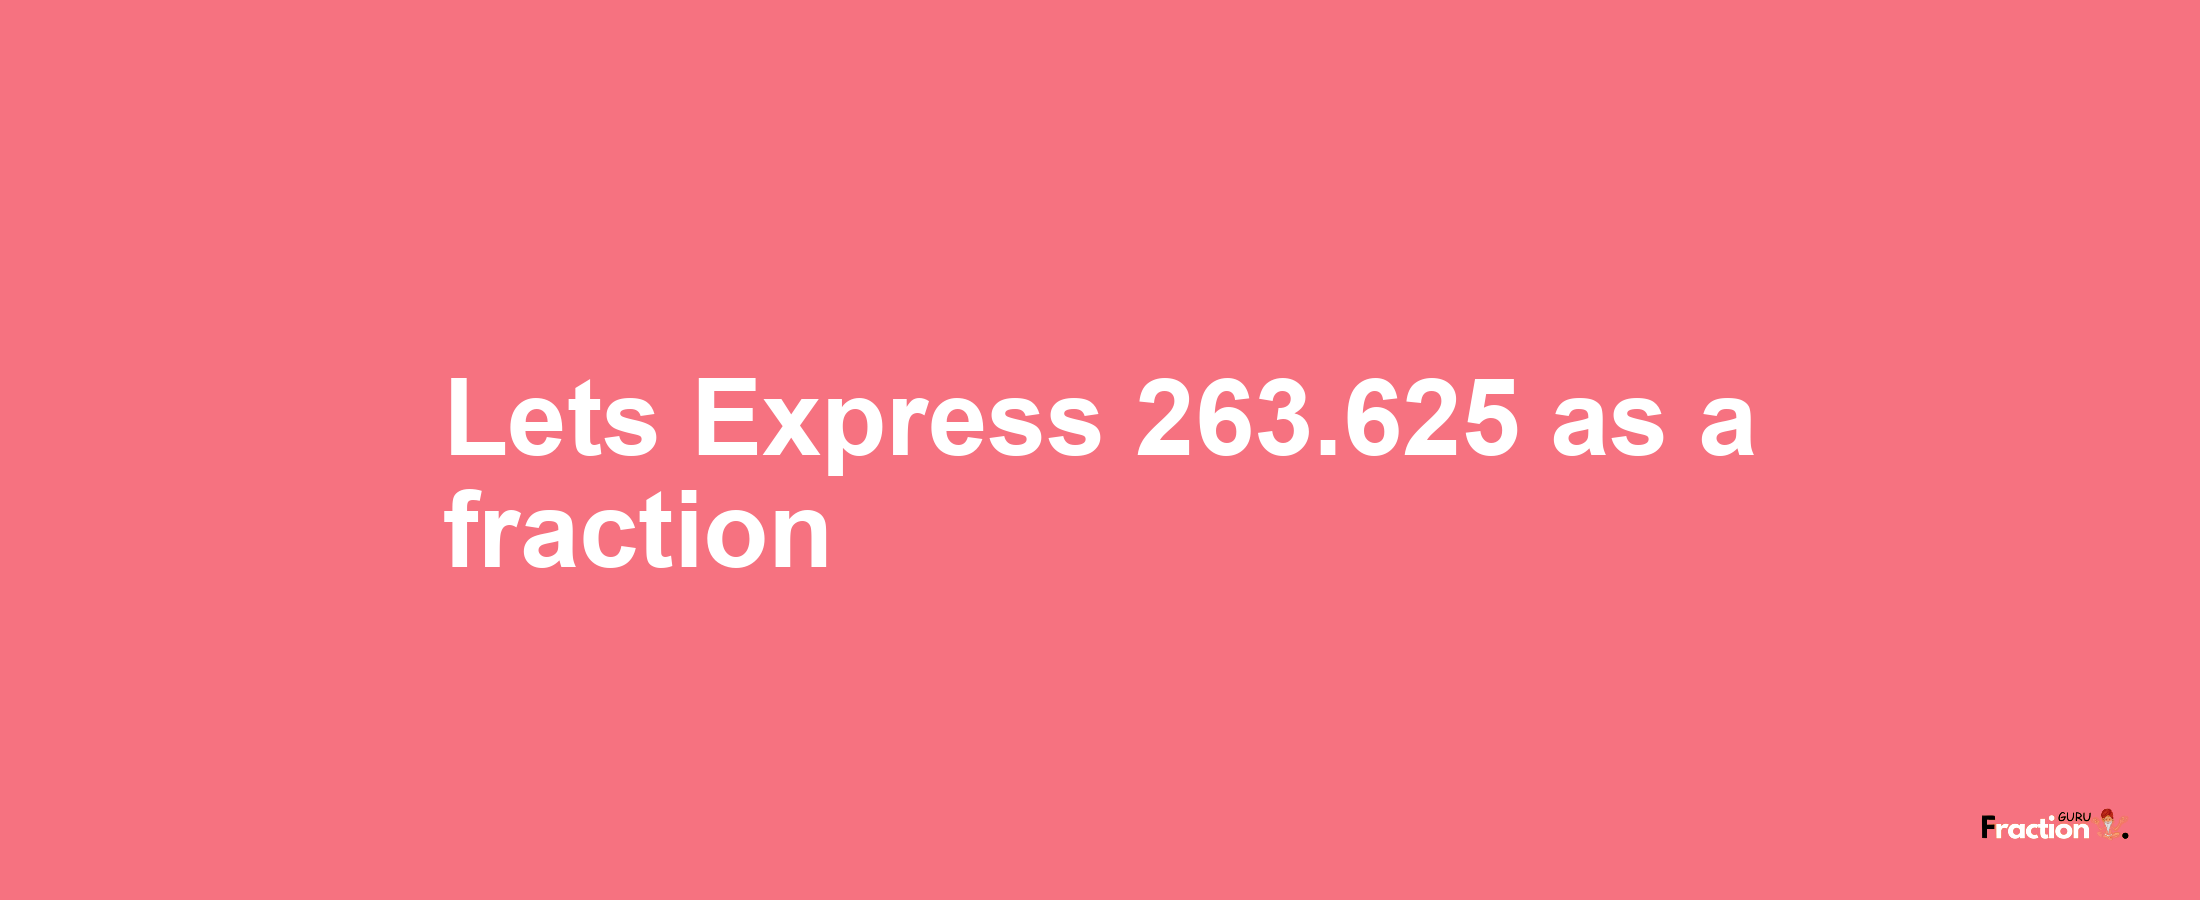 Lets Express 263.625 as afraction